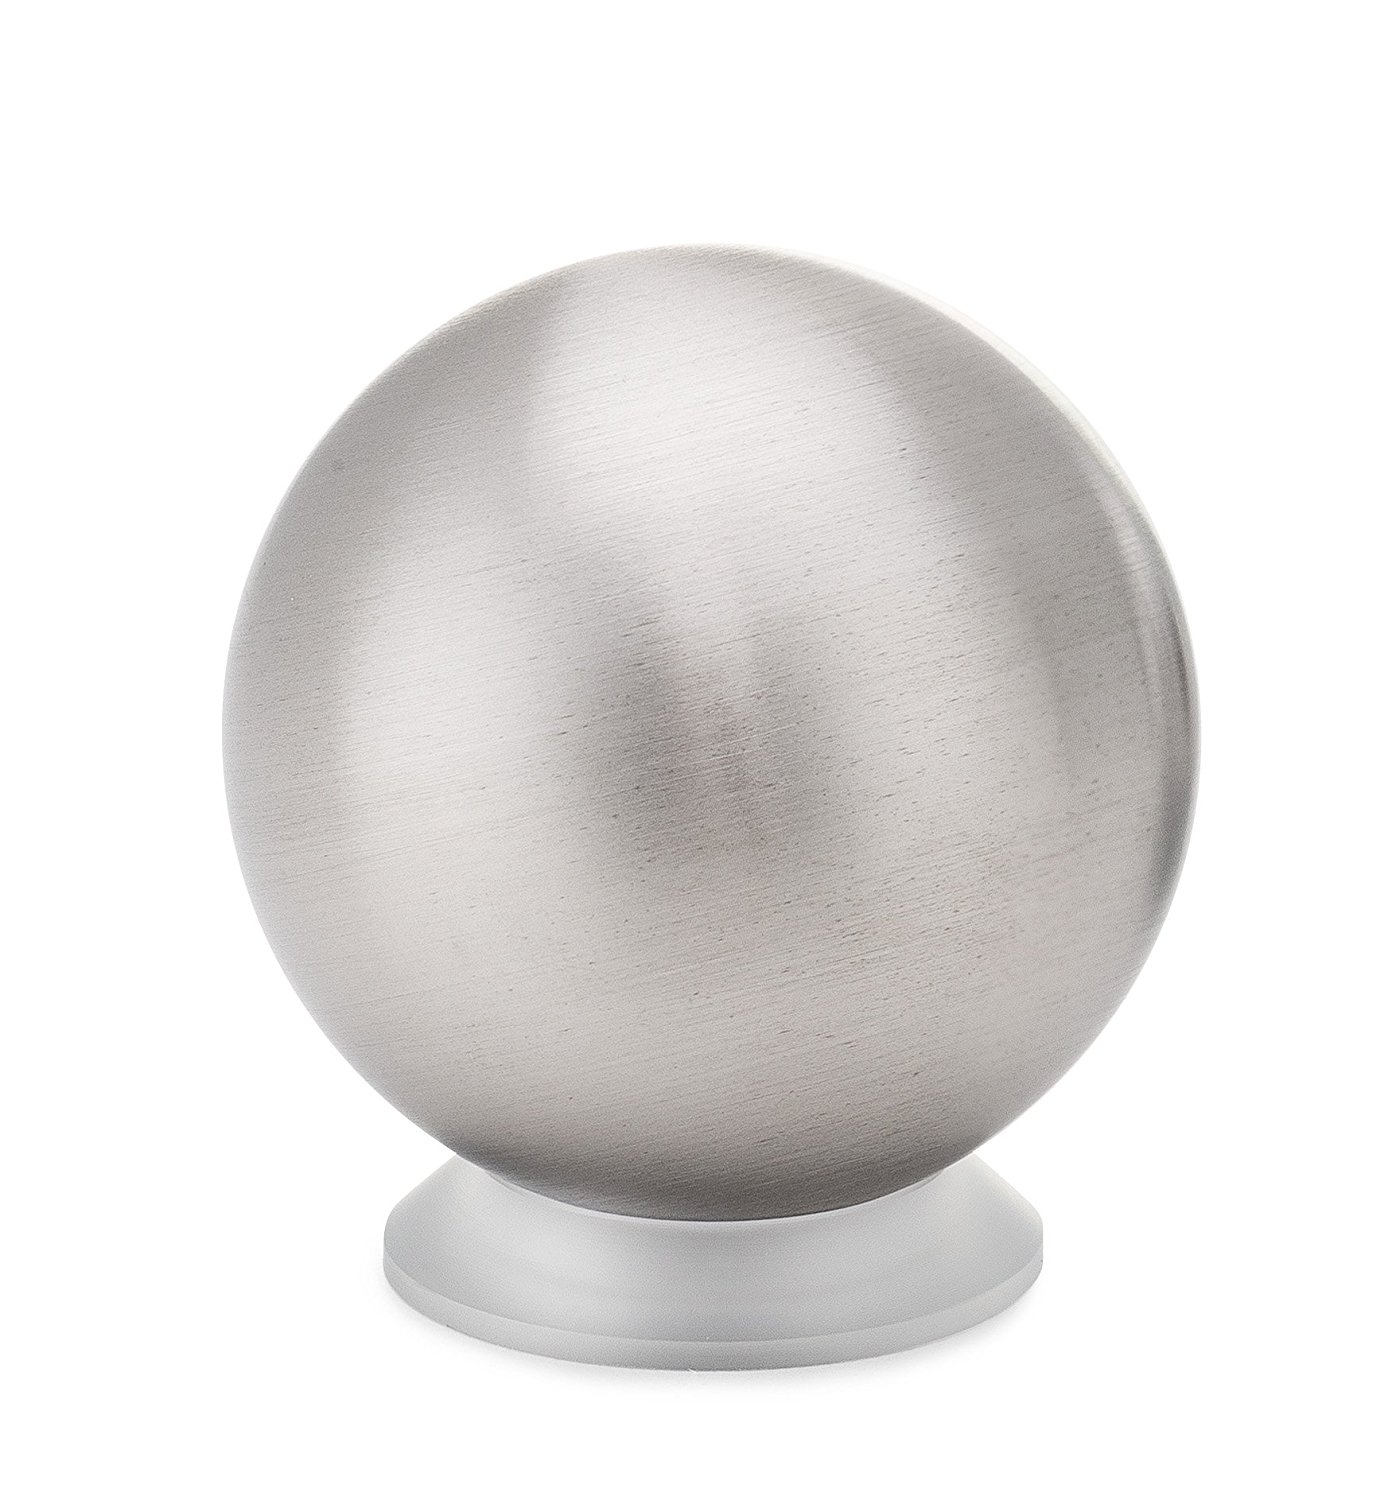 Tungsten Sphere - 1.5 kilogram Ball with Base | LIMITED TIME OFFER ...